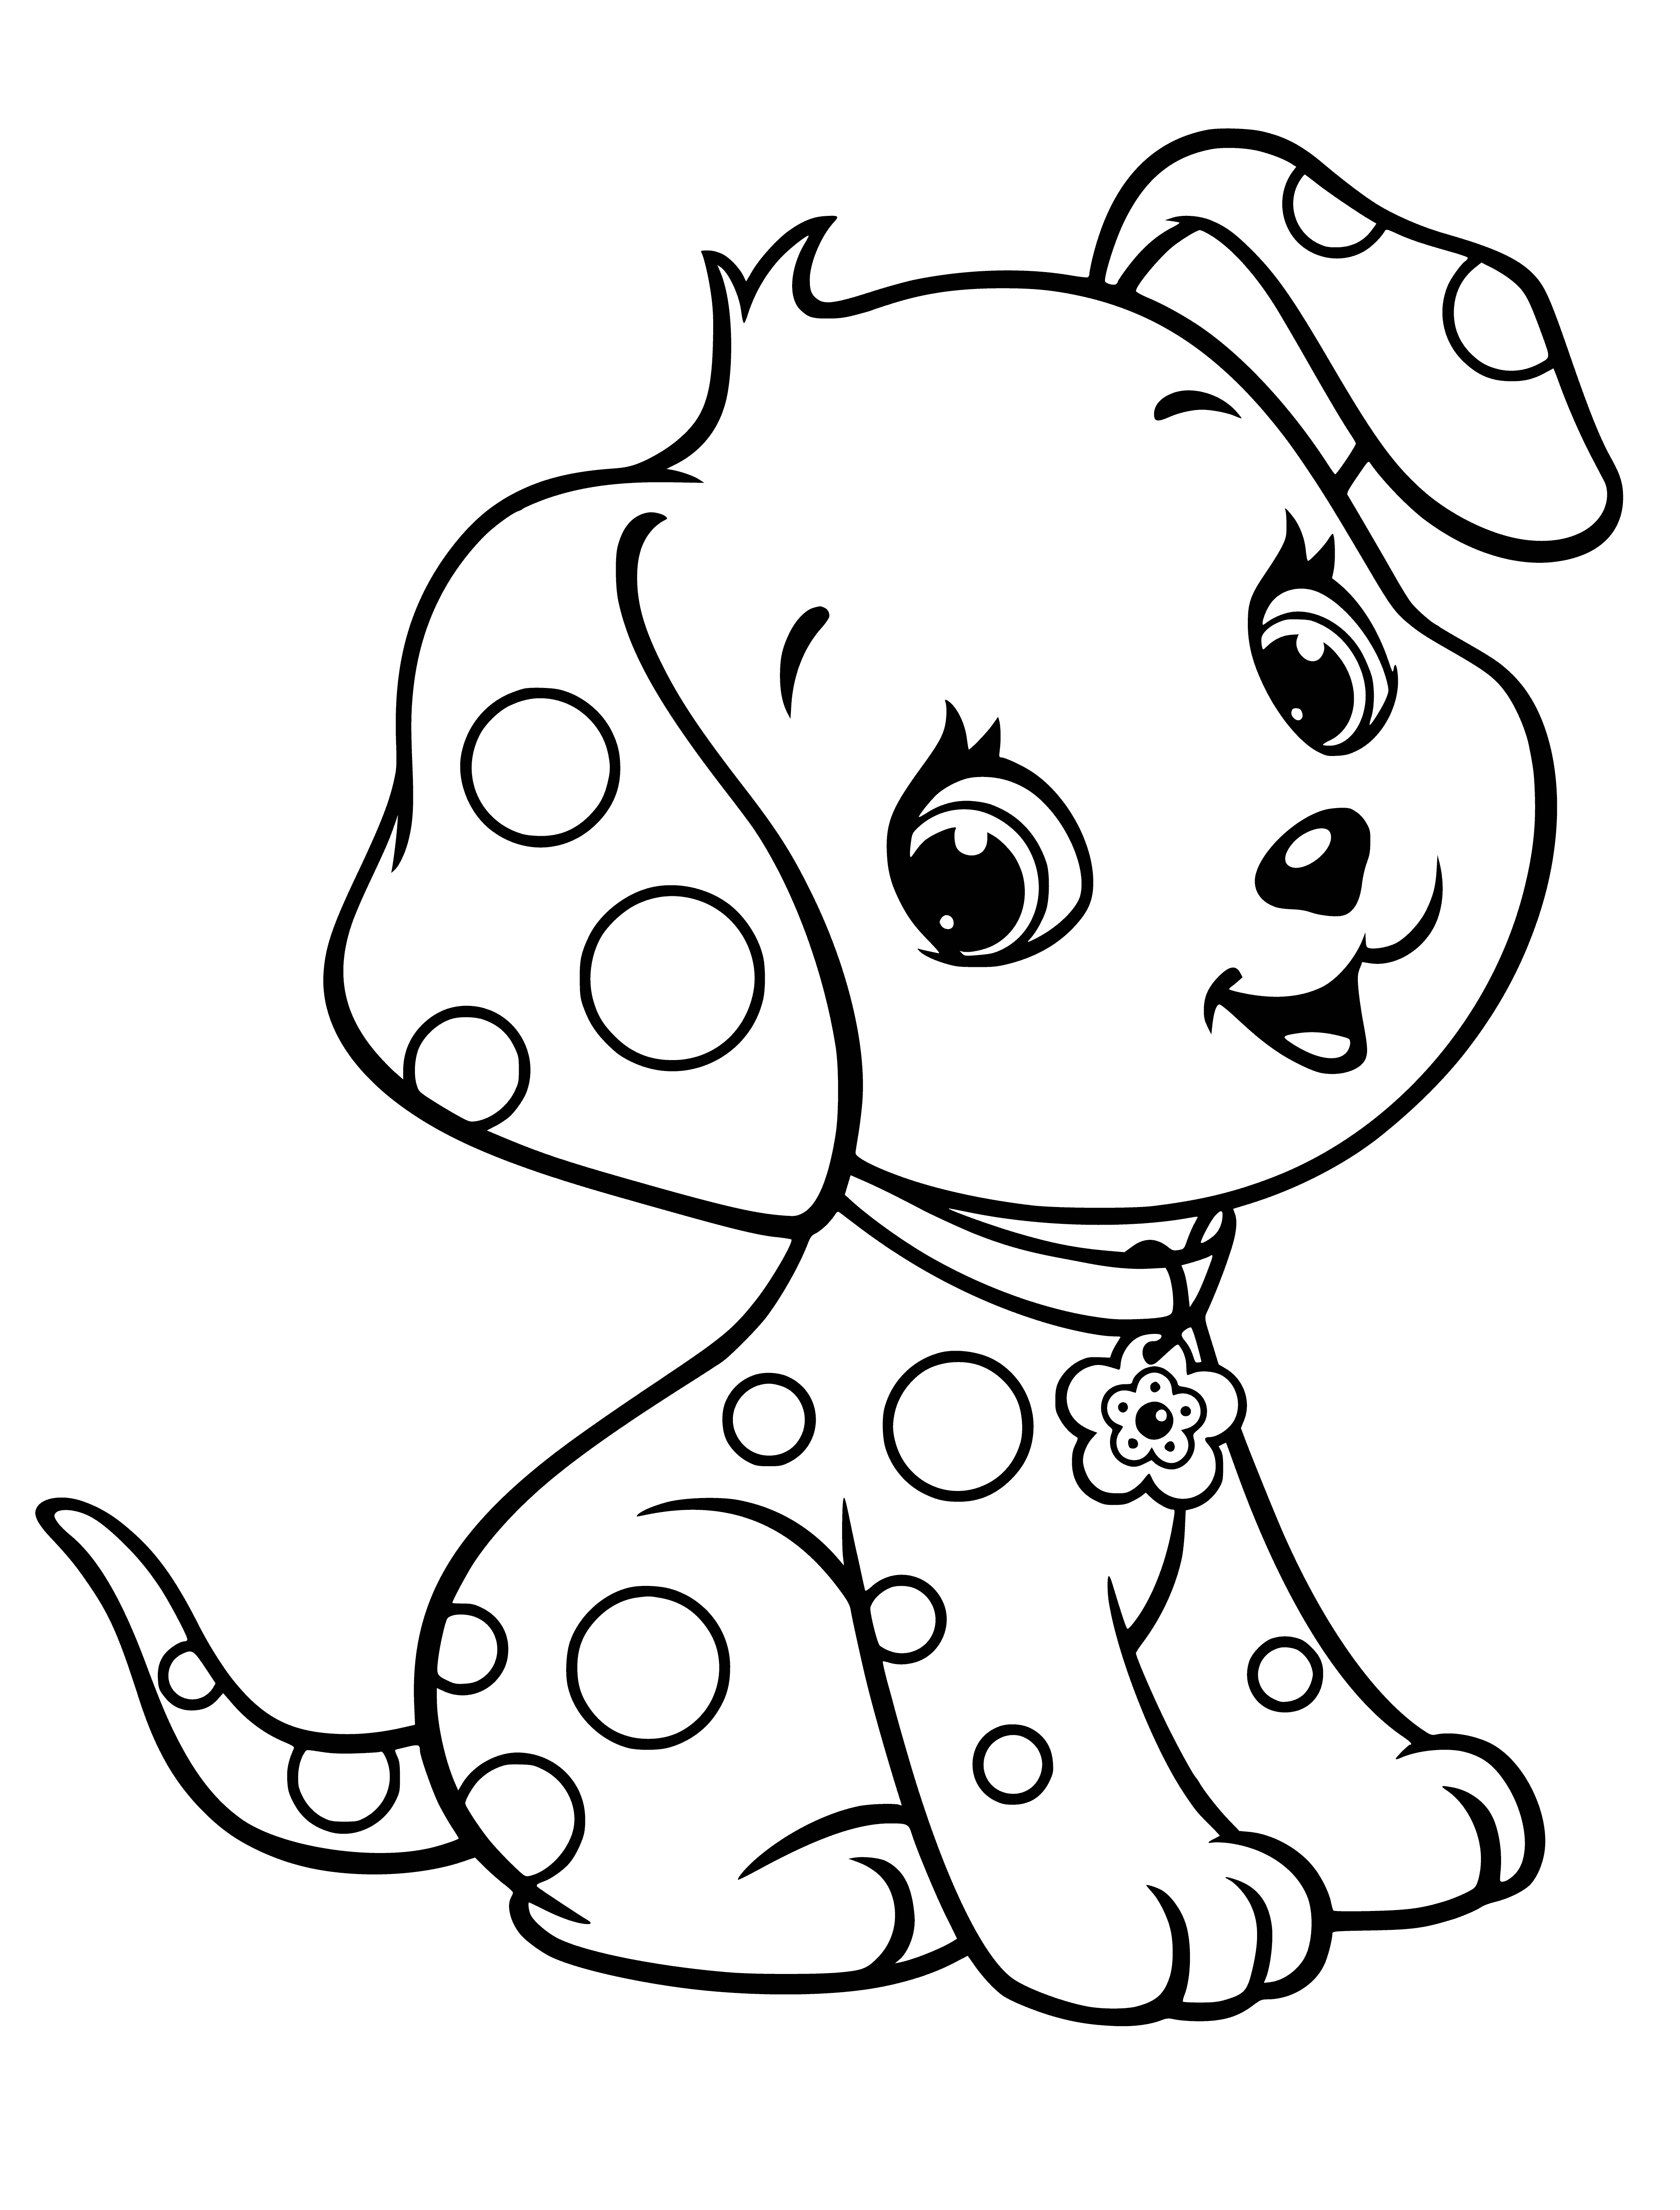 coloring page: Adorable puppy sitting down with tongue out, has short, light brown fur, dark eyes and a black nose.